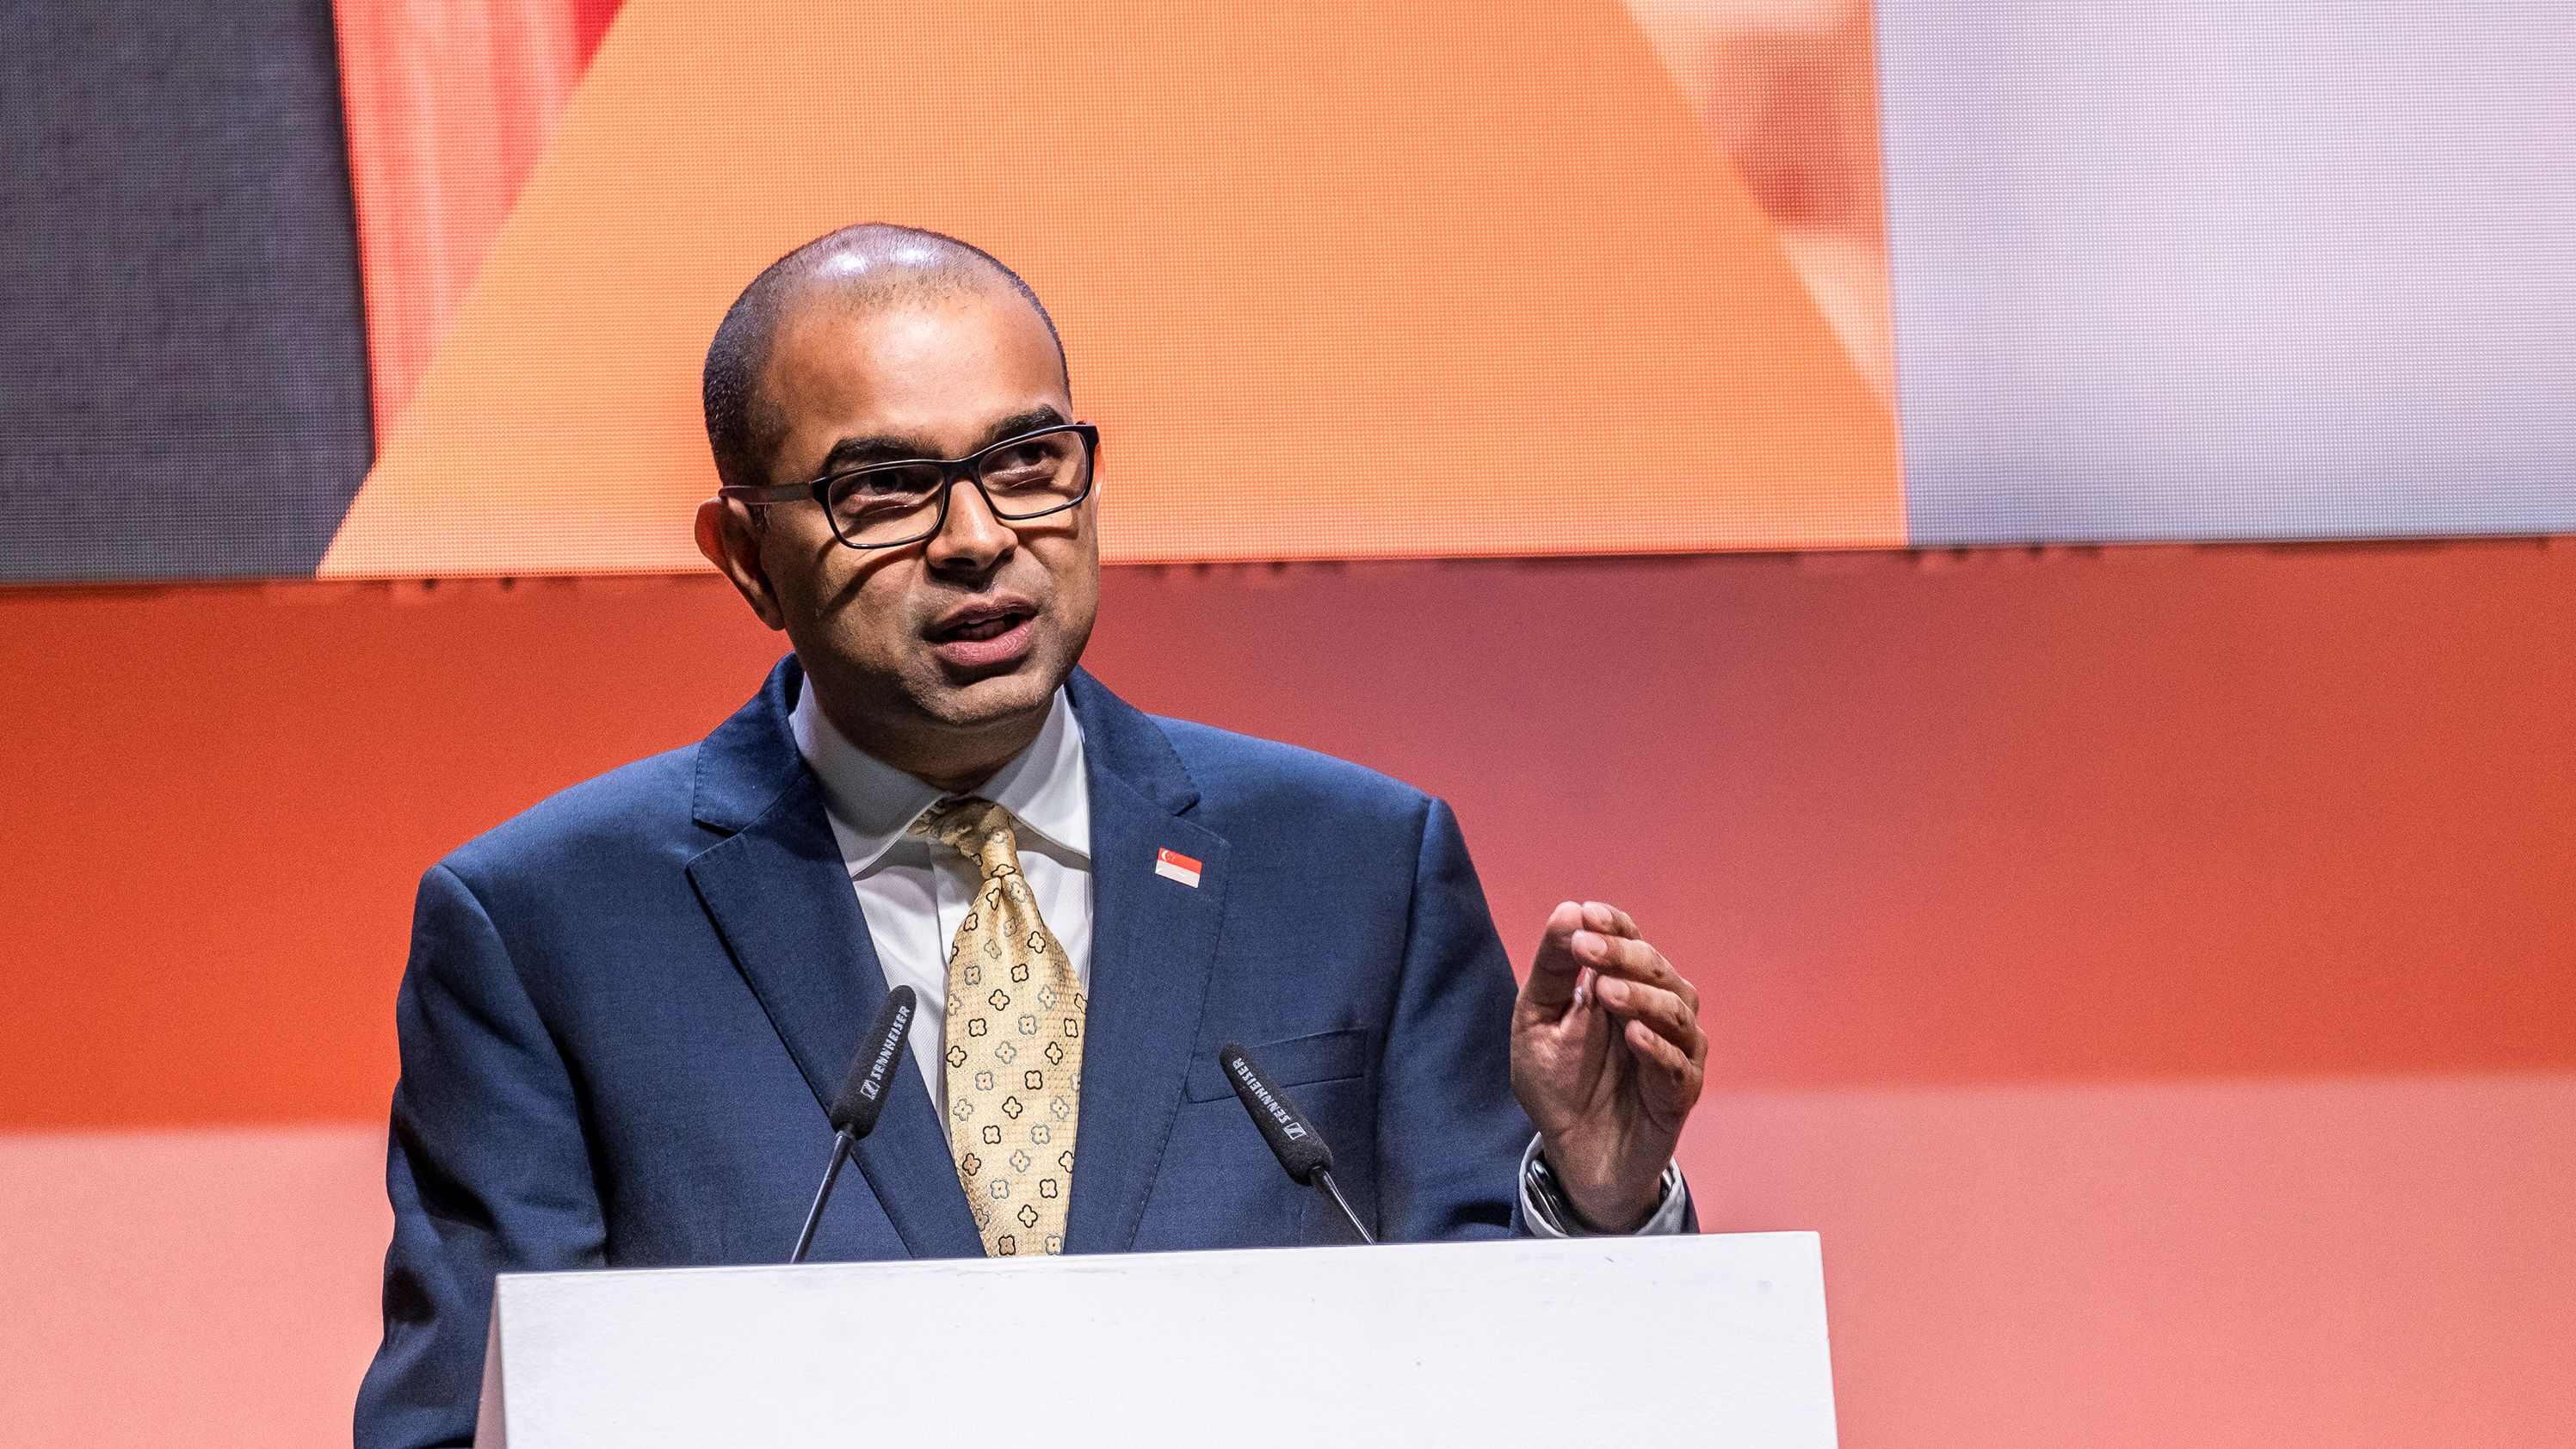 Janil Puthucheary, Senior Minister of State of Singapore's Ministry of Transport and Communications. speaking at an event in Barcelona on November 13, 2018.